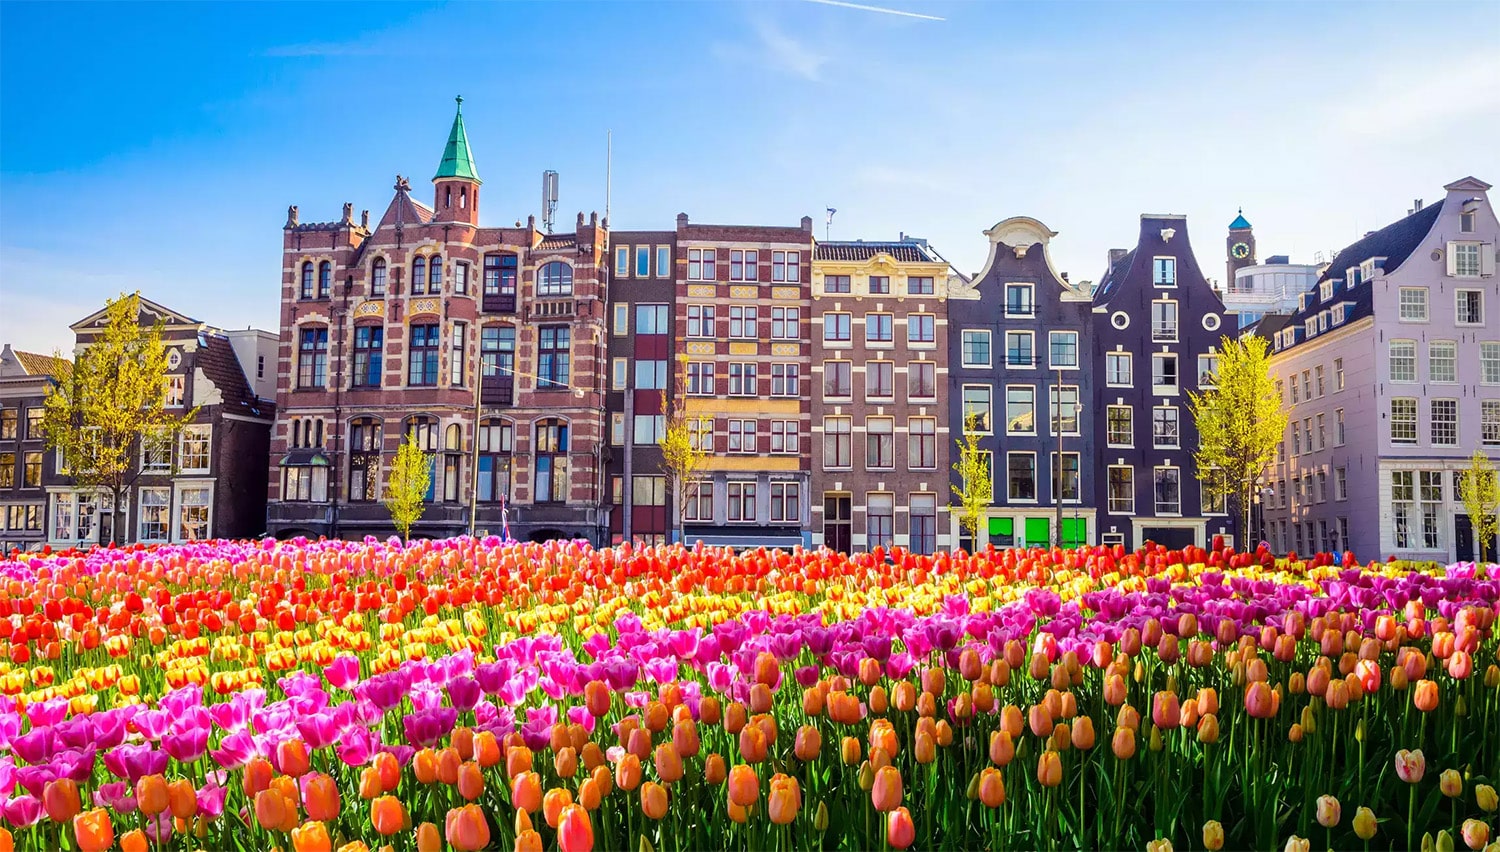 26 interesting facts about Netherlands